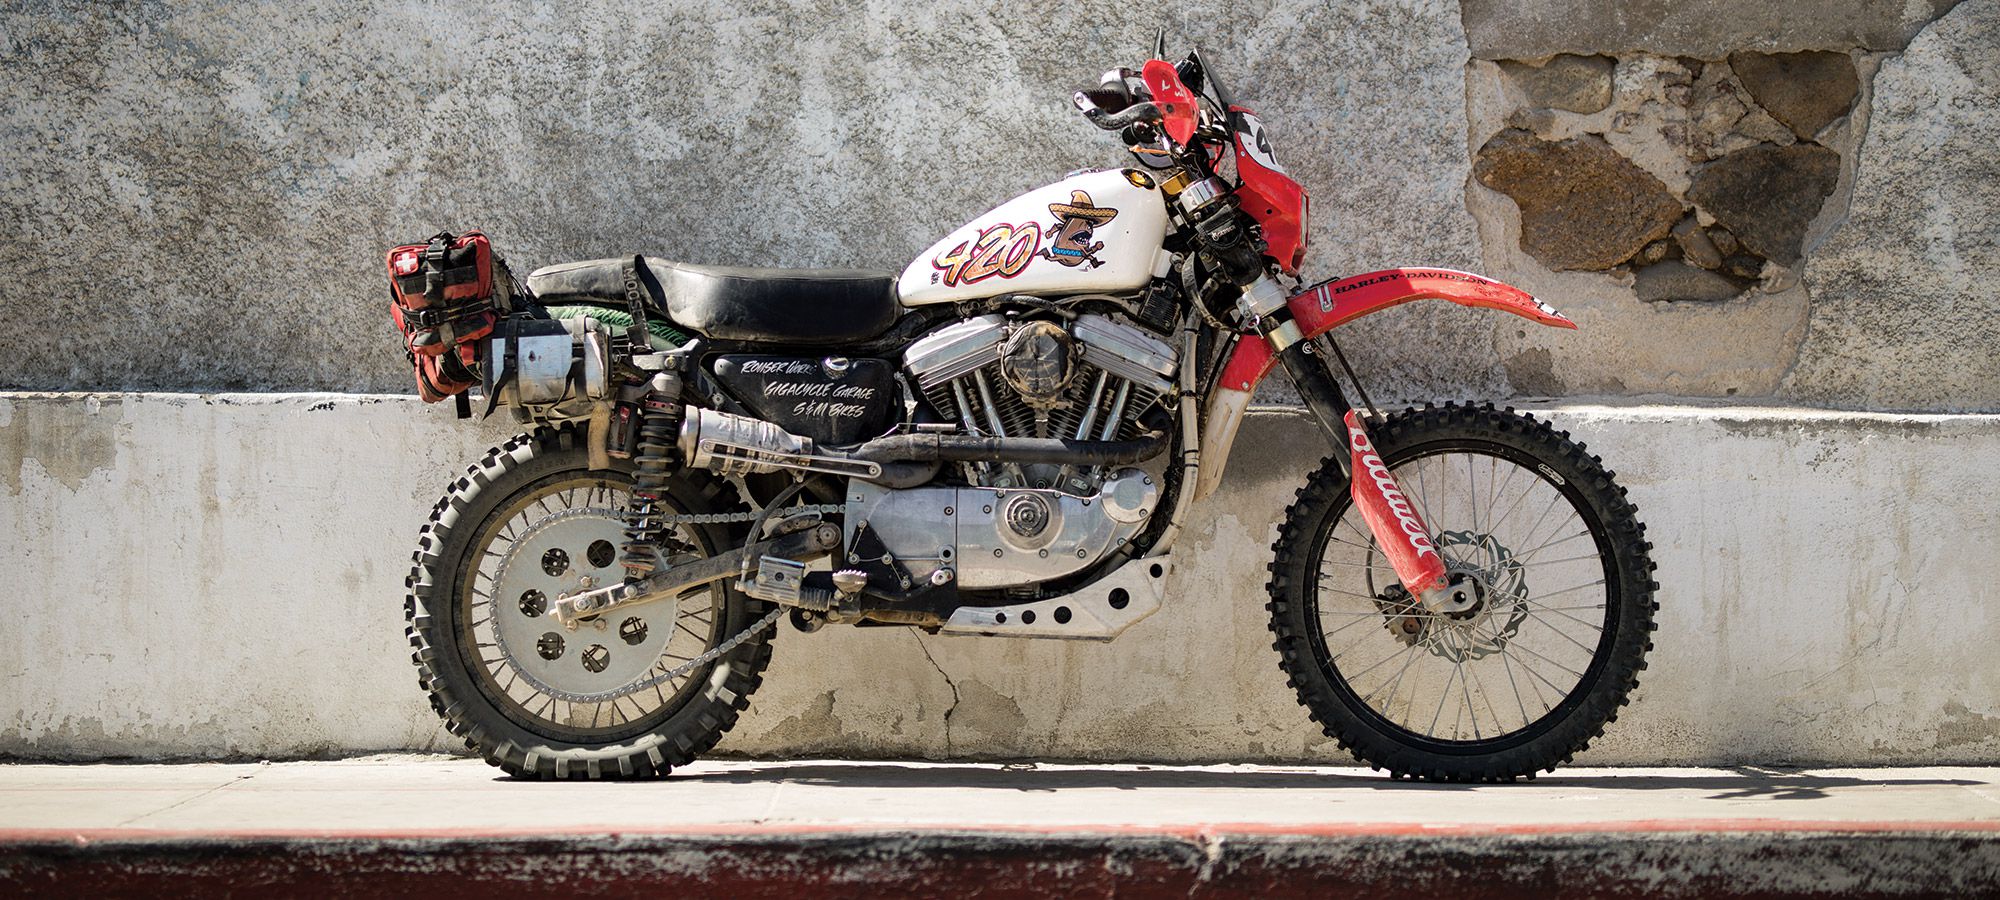 Racing A Harley Davidson Sportster 883 In The Norra Mexican 1000 Motorcyclist